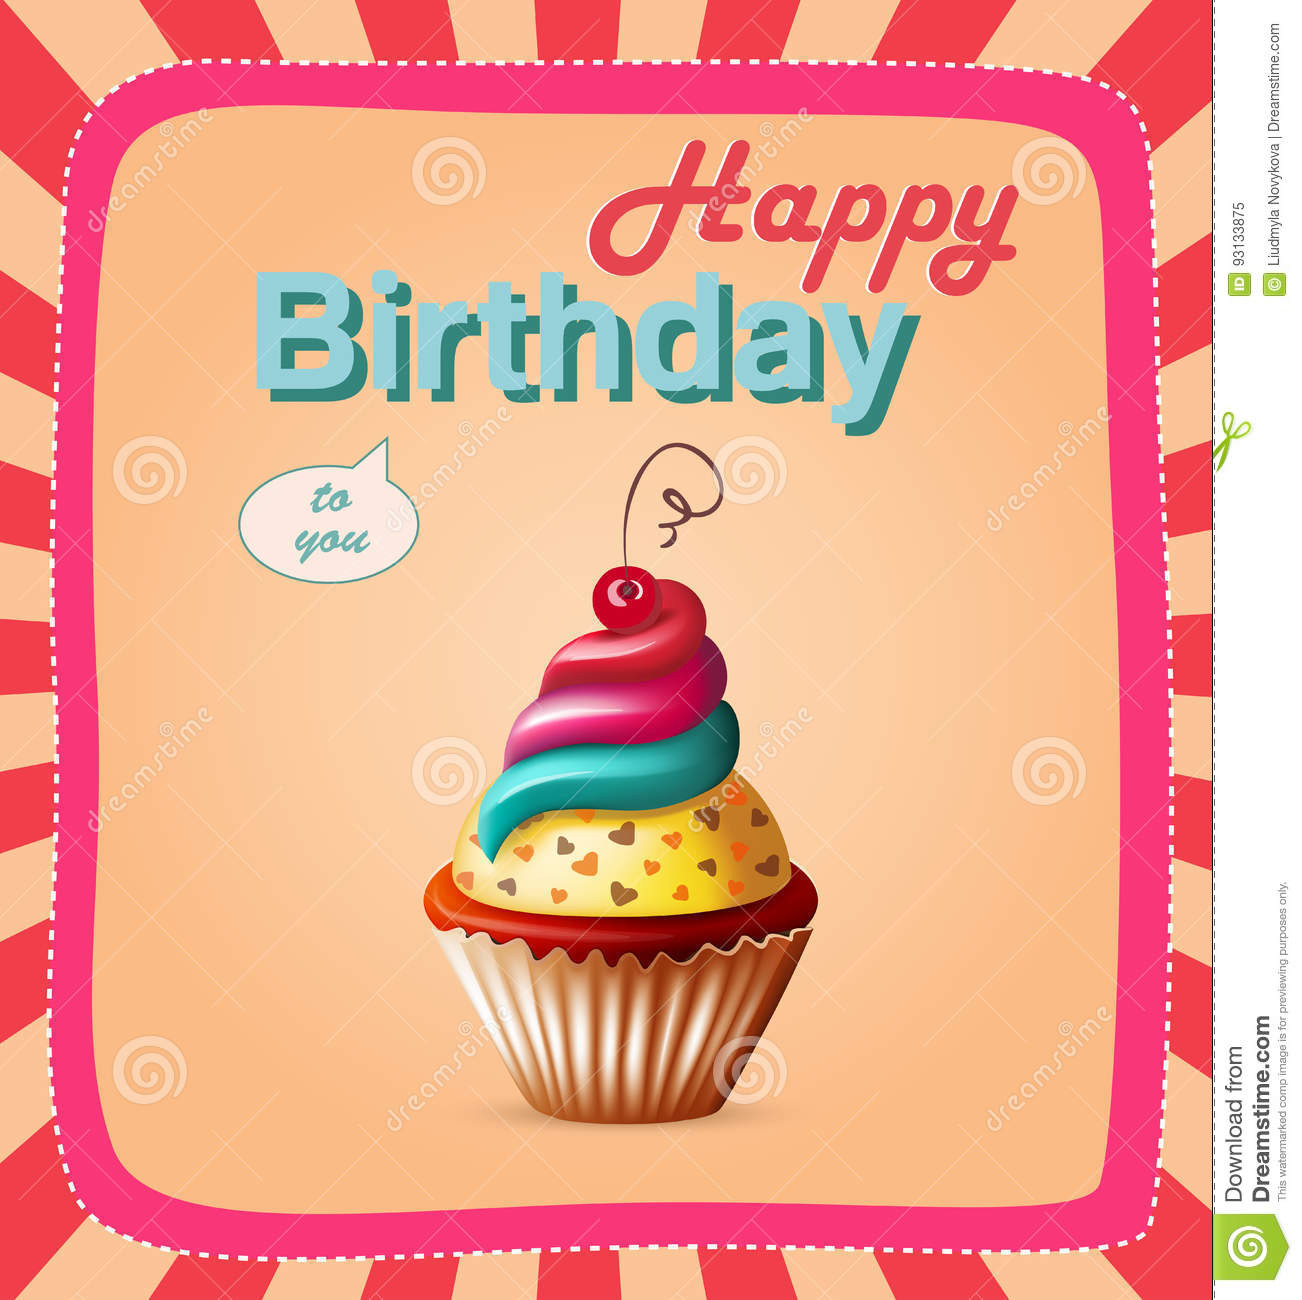 Happy Birthday Cake Text
 Happy Birthday Template Card With Cake And Text Stock